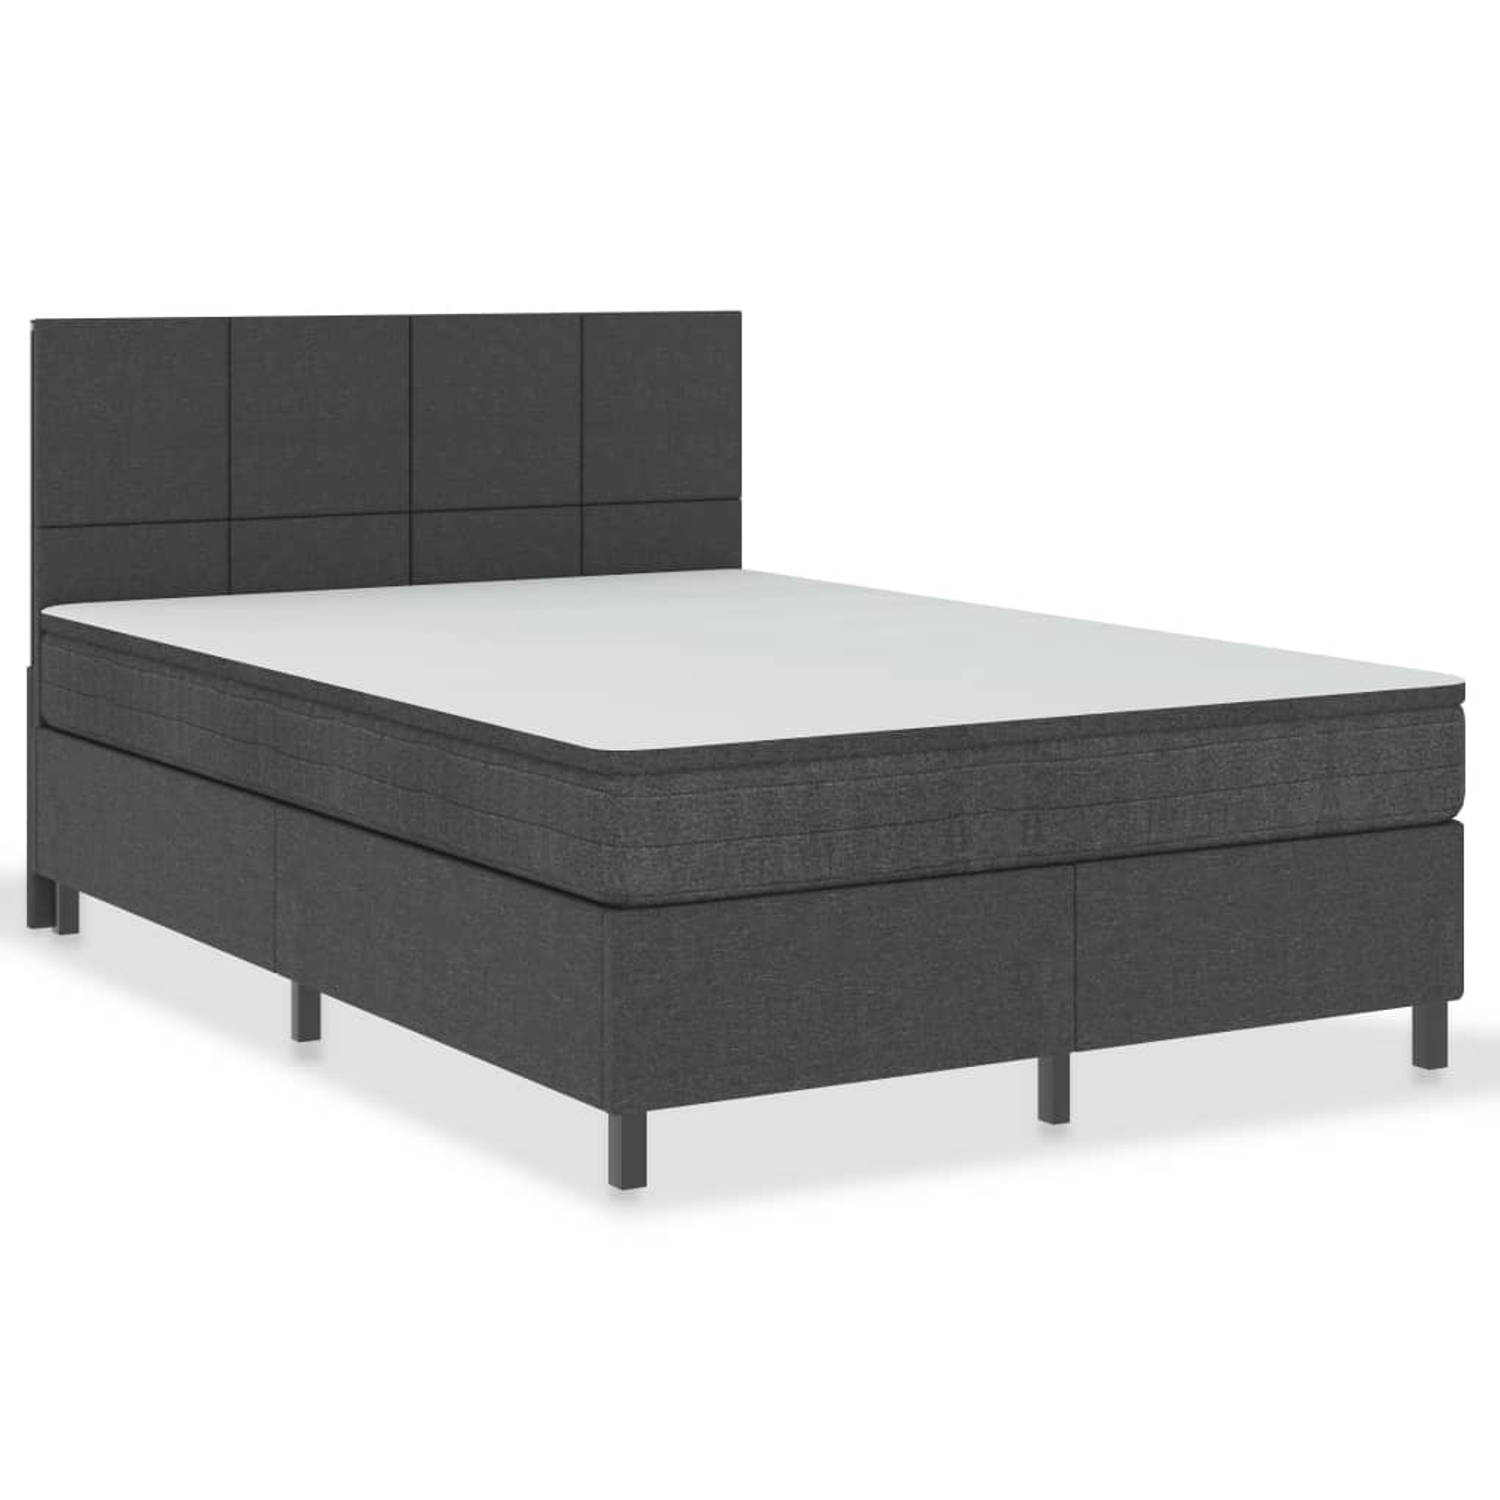 The Living Store Boxspring stof donkergrijs 180x200 cm - Boxspring - Boxsprings - Boxspringbed - Boxspringbedden - Hotelbed - Hotelbedden - Bed - Bedden - Tweepersoonsbed - Tweeper